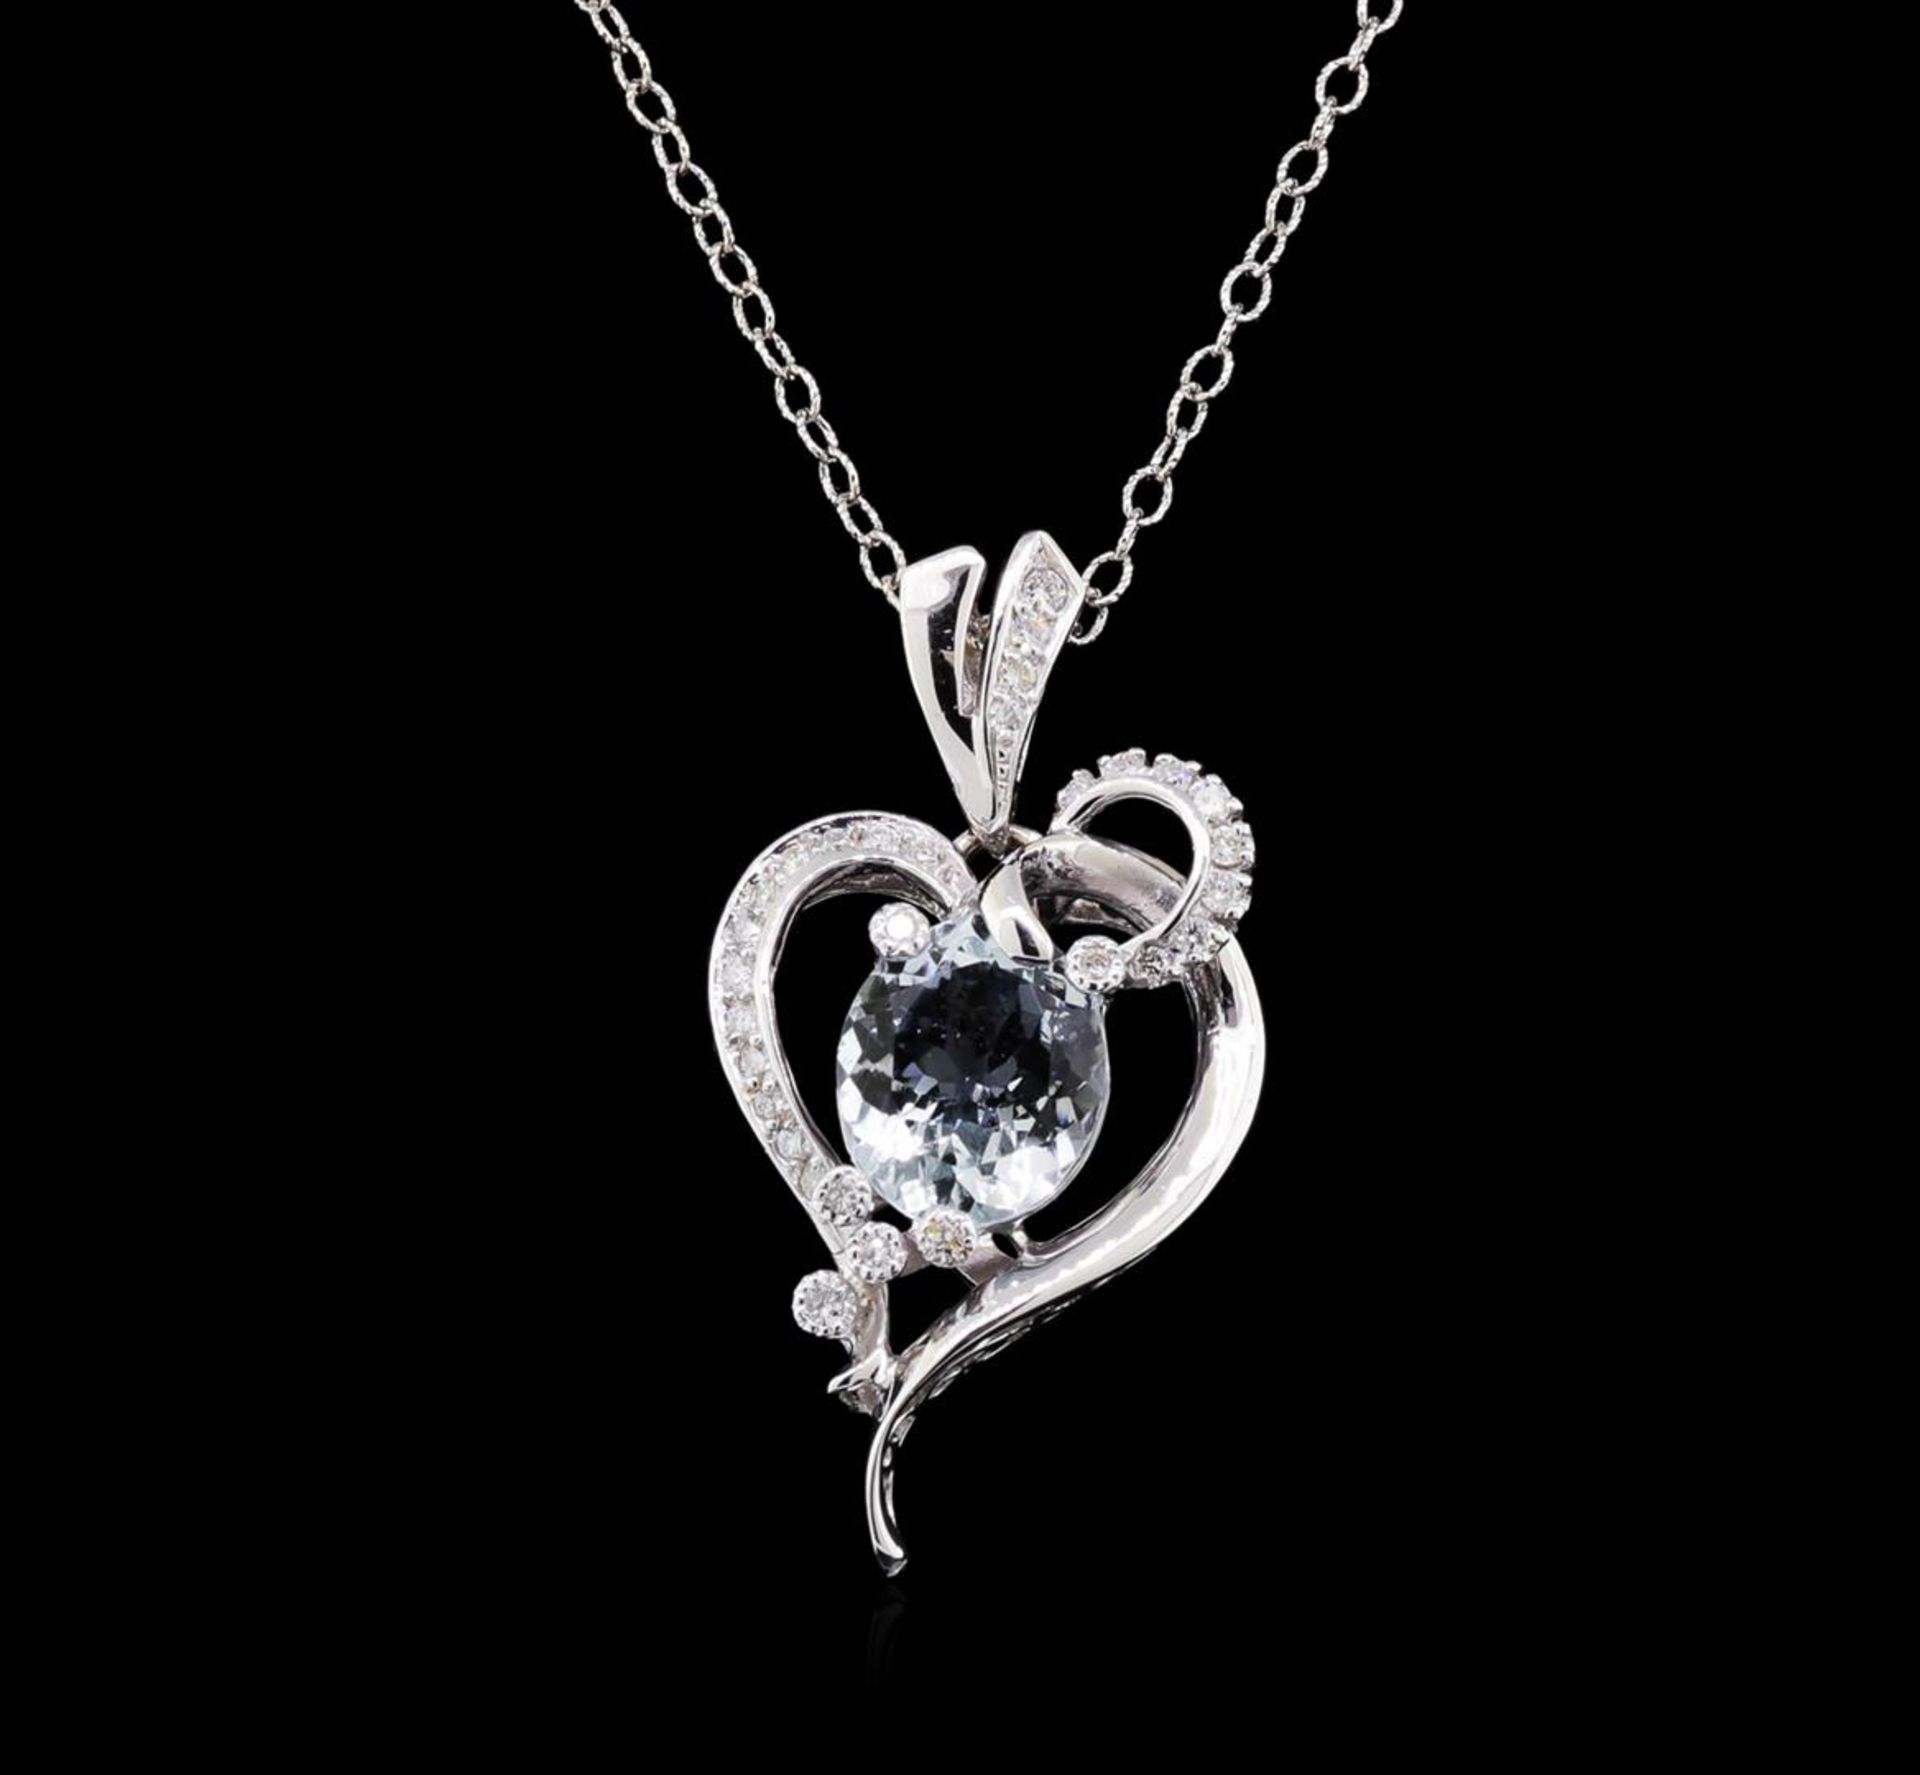 3.52 ctw Aquamarine and Diamond Pendant With Chain - 14KT White Gold - Image 2 of 3